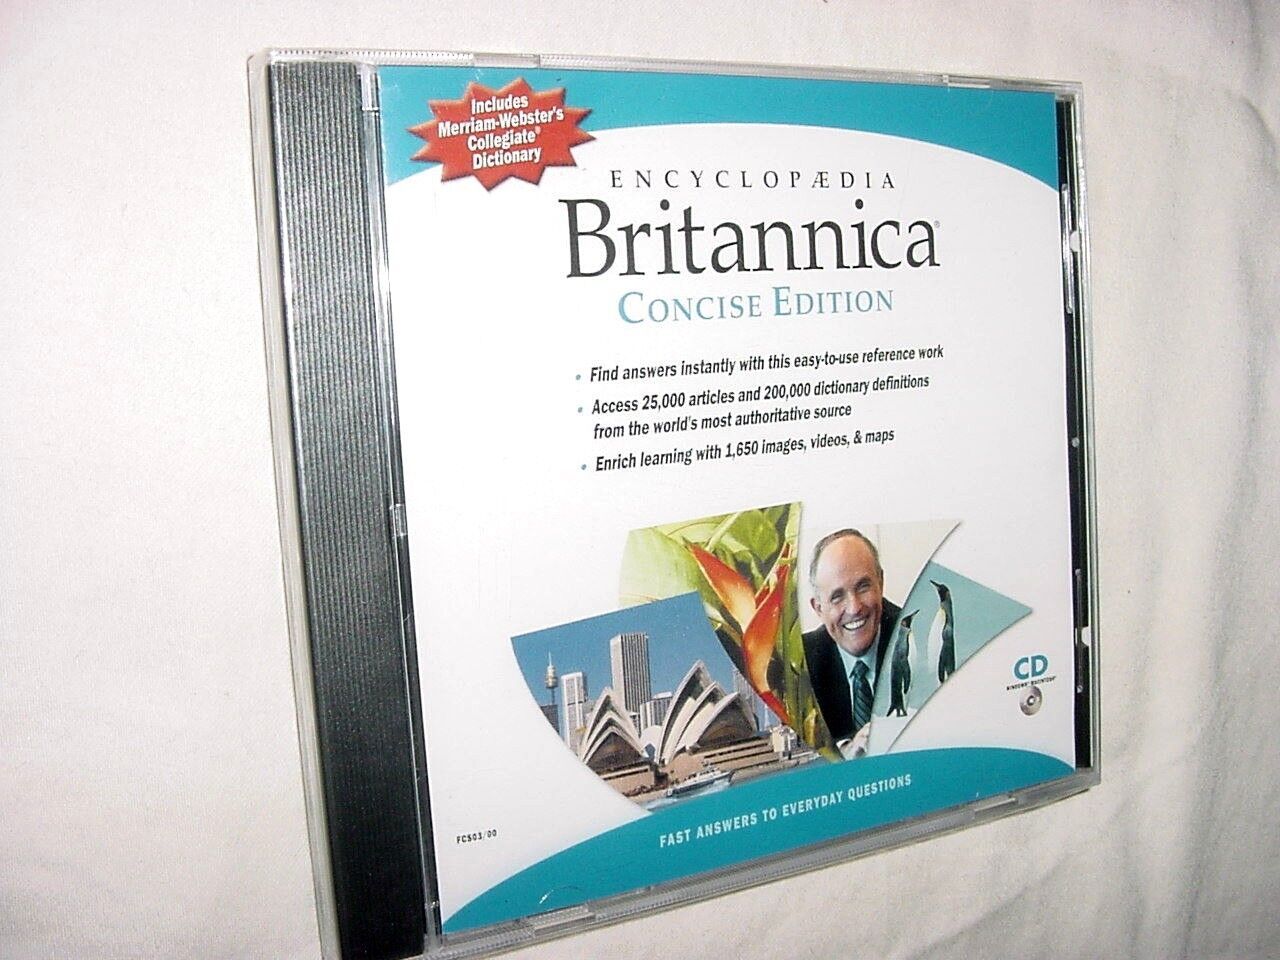 New Sealed Encyclopedia Britannica Concise CD Windows MAC Dictionary Thesaurus